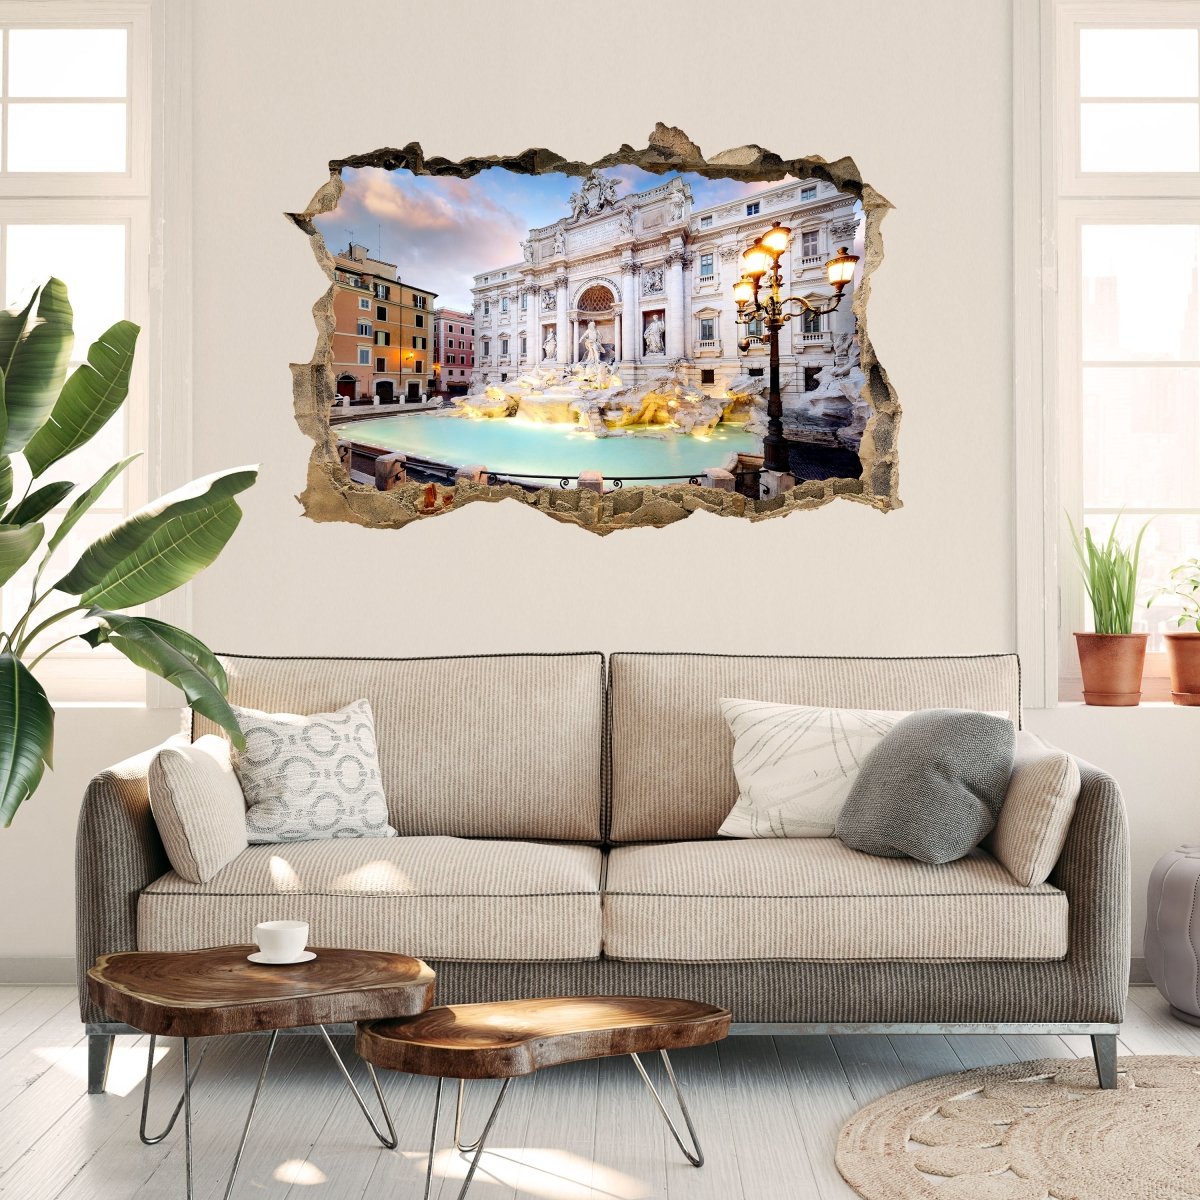 3D wall sticker Trevi Fountain, Rome - Wall Decal M1024